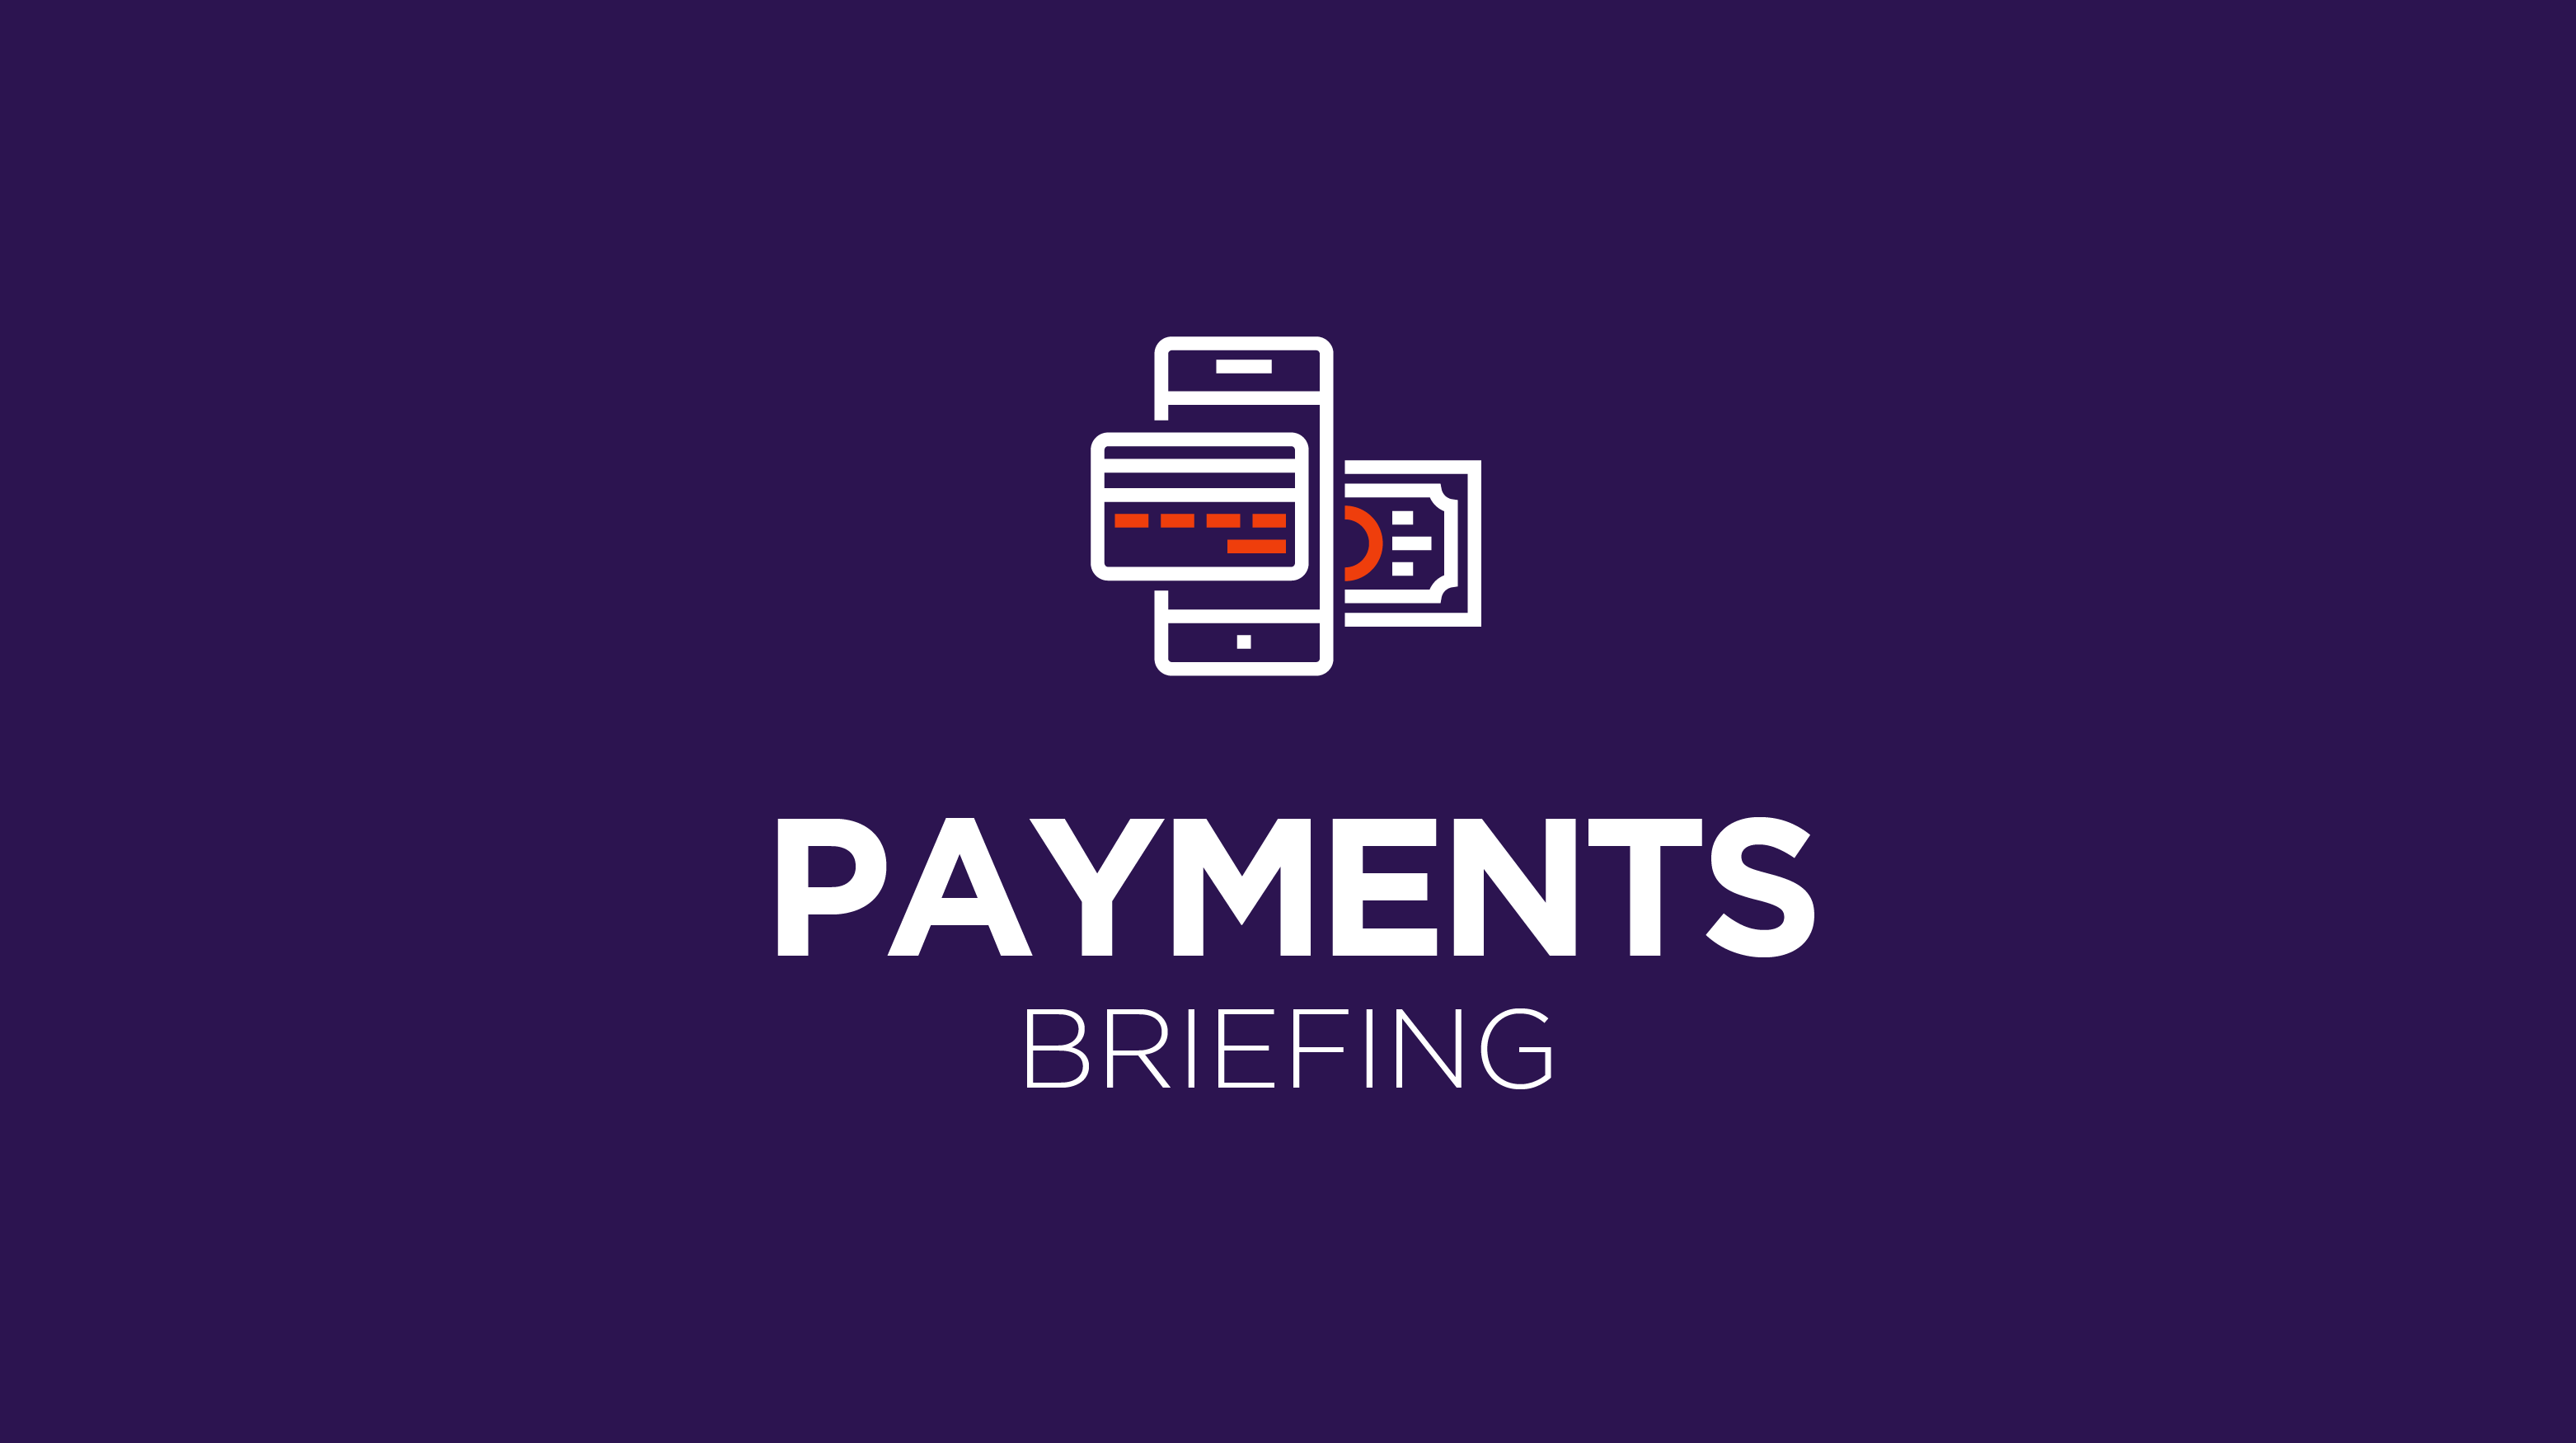 Payments Briefing: Digital payments are making it “easier than ever” for young consumers to make bad financial decisions￼